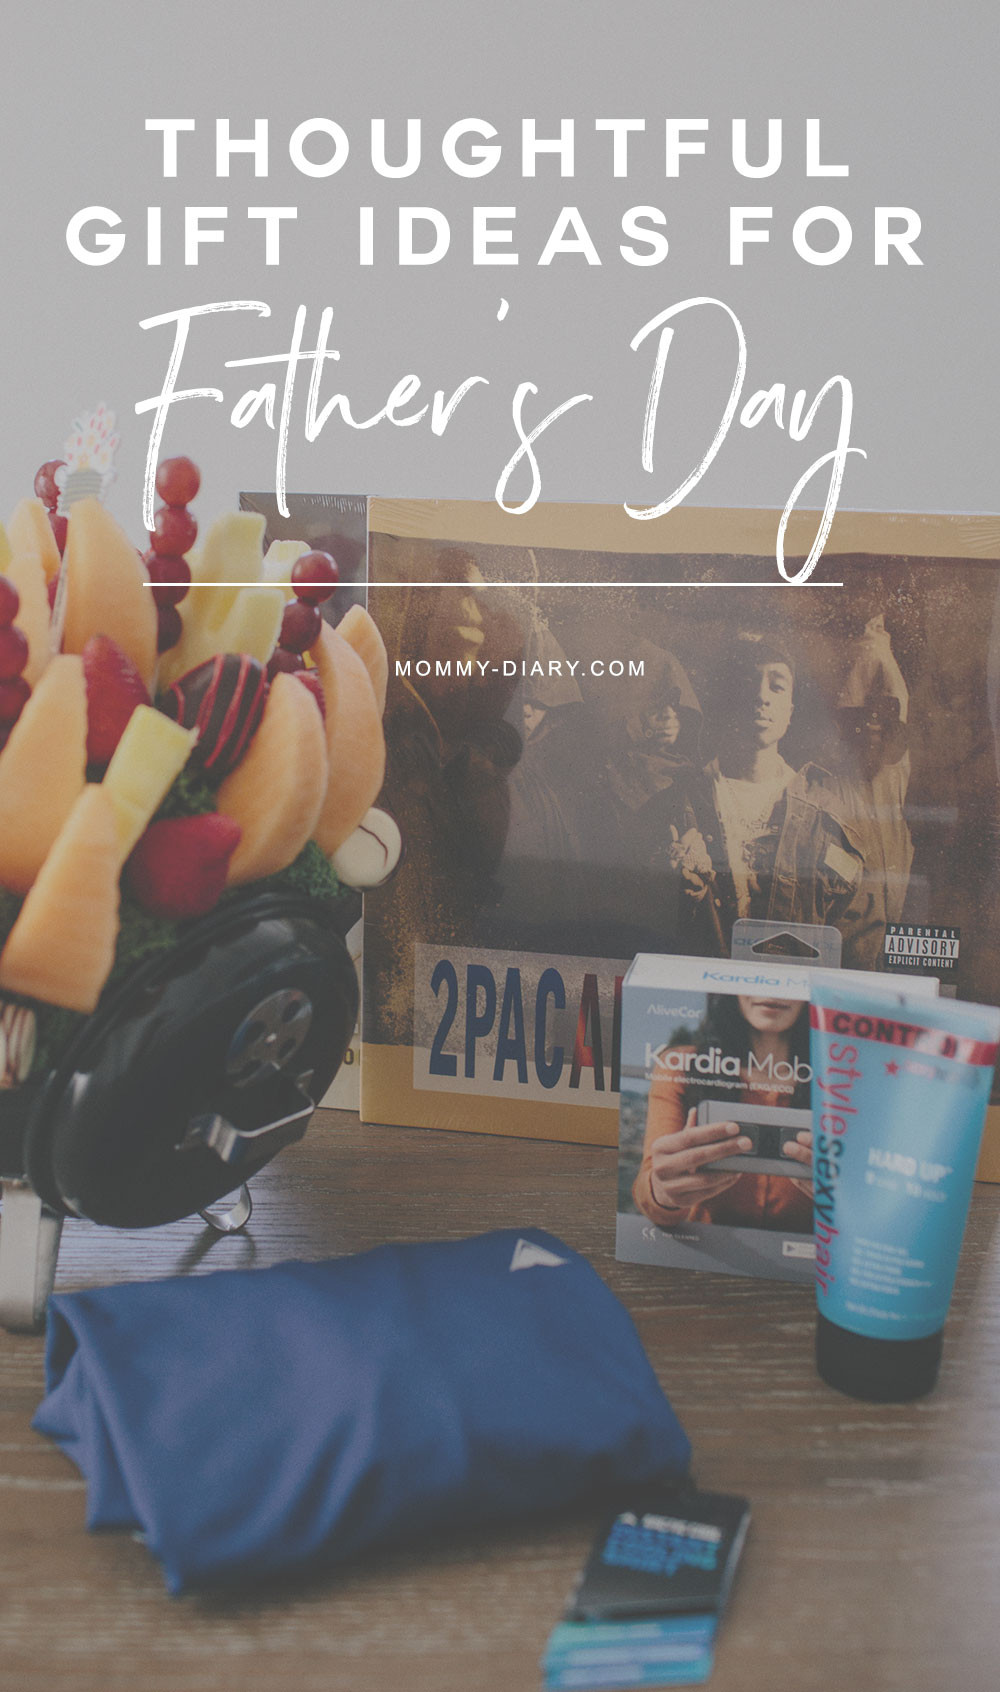 Thoughtful Fathers Day Gift Ideas
 Five Thoughtful Gift Ideas For Father s Day